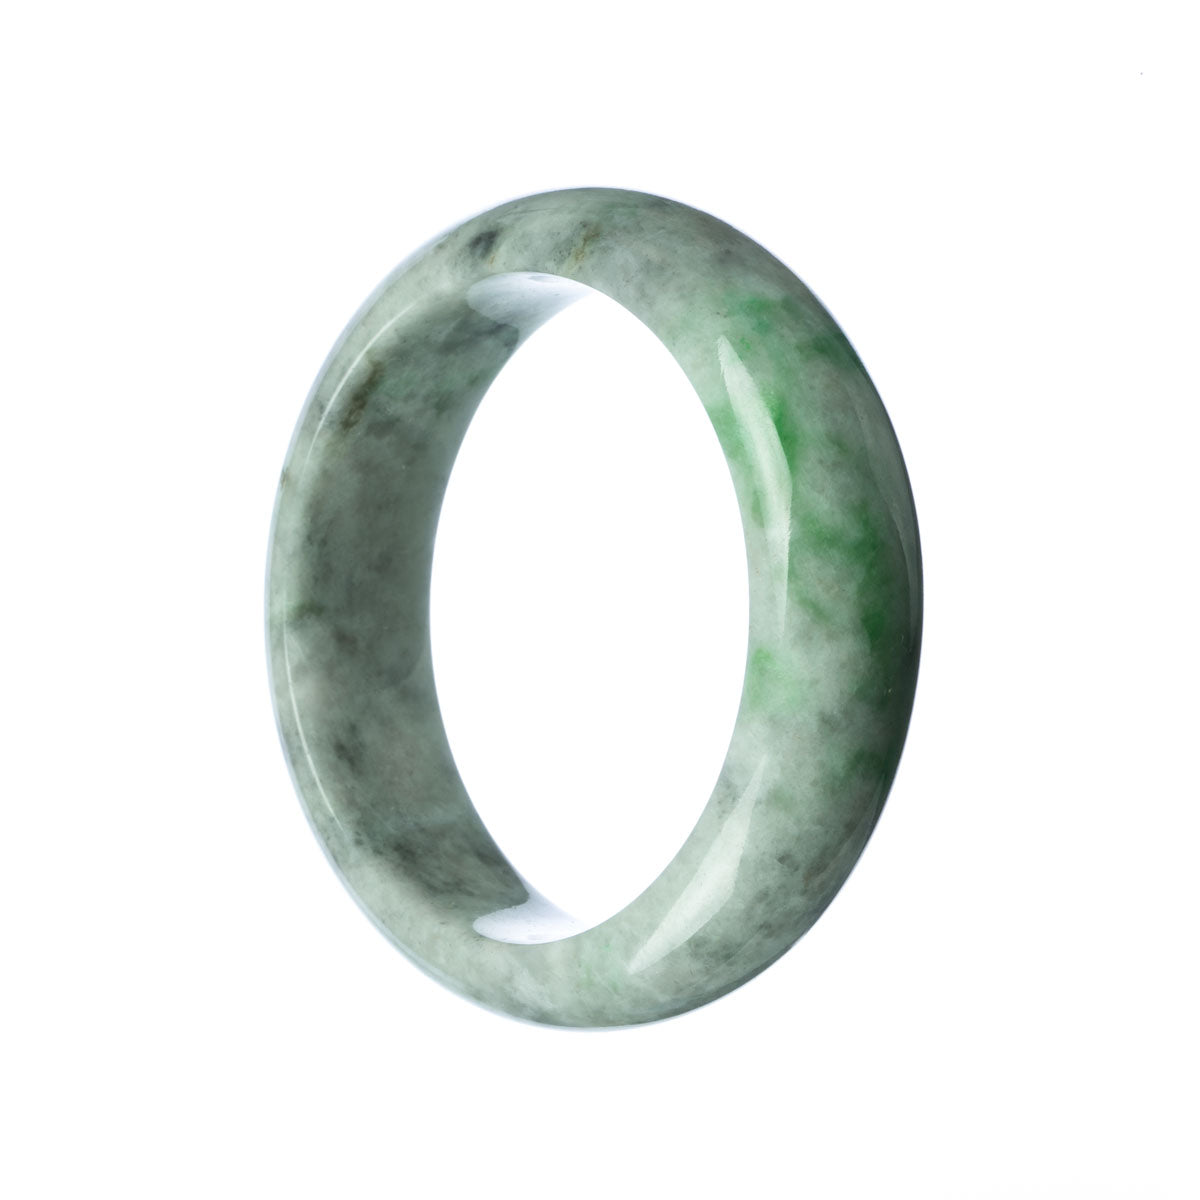 An authentic Grade A Grey Green Traditional Jade Bangle with a 58mm half-moon shape. This bangle, known as MAYS, showcases the beauty and elegance of traditional jade craftsmanship.